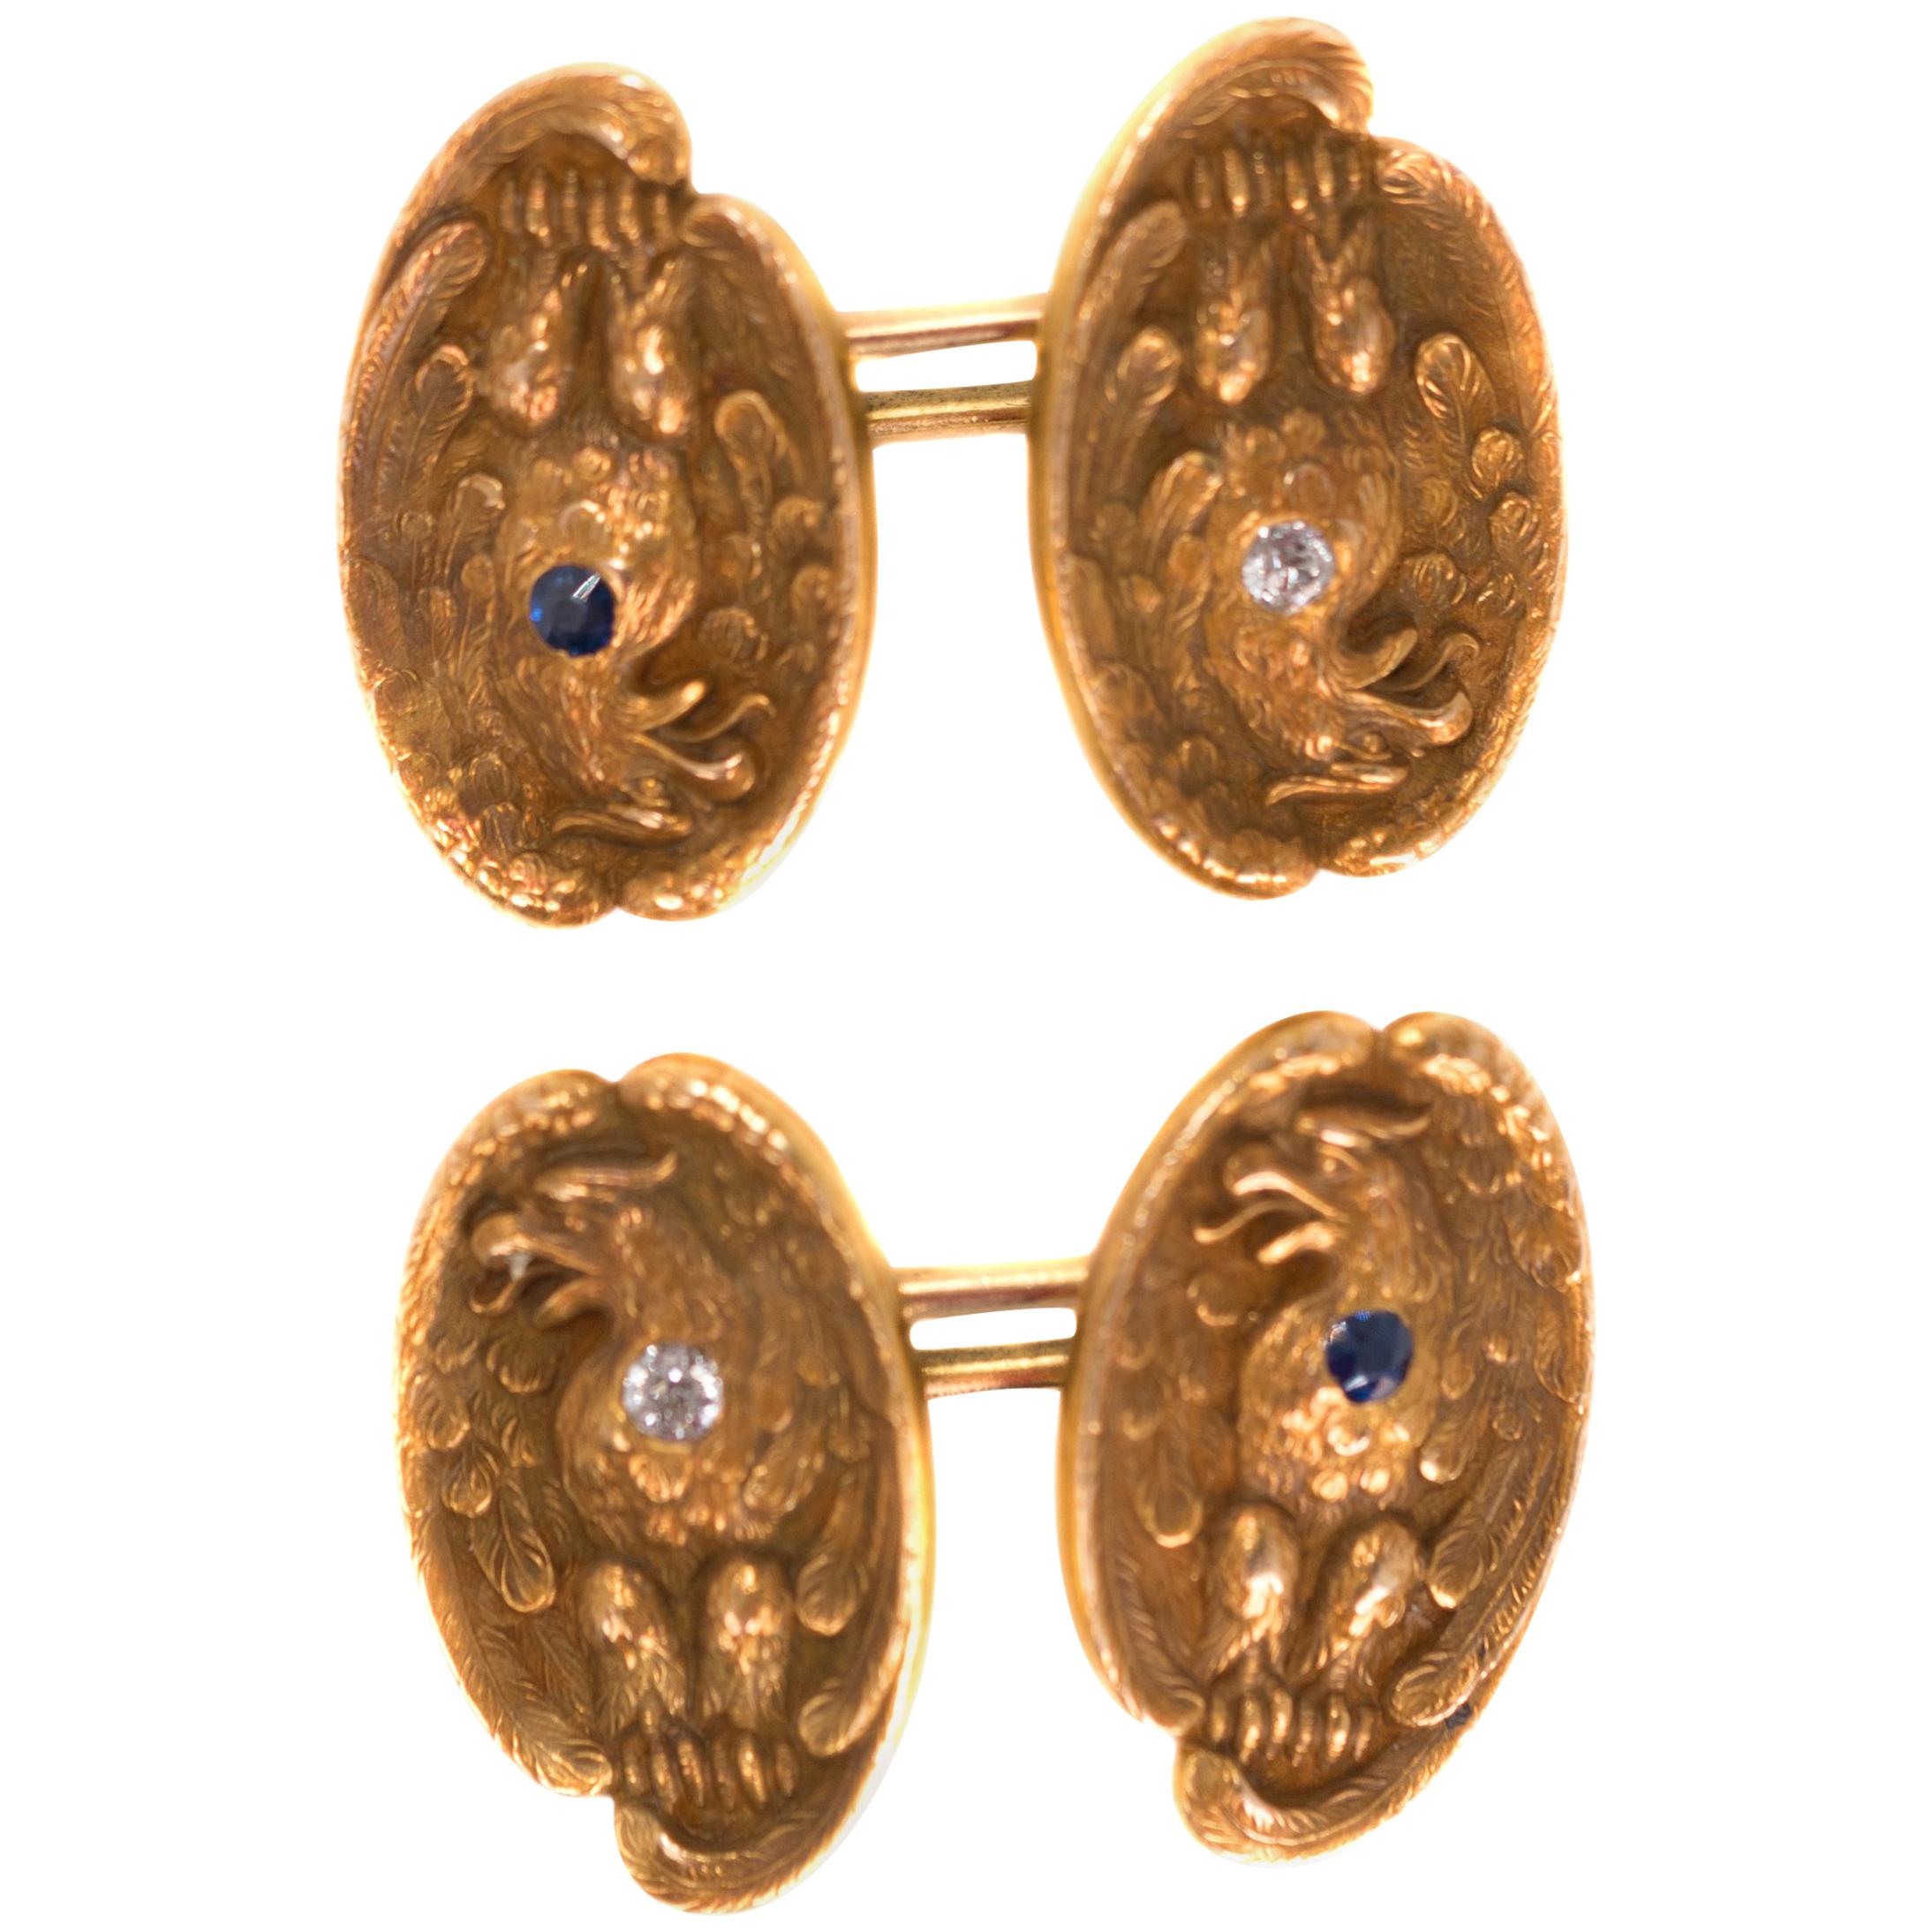 1860s Victorian Cufflinks in 14 Karat Yellow Gold with Diamonds and Sapphires